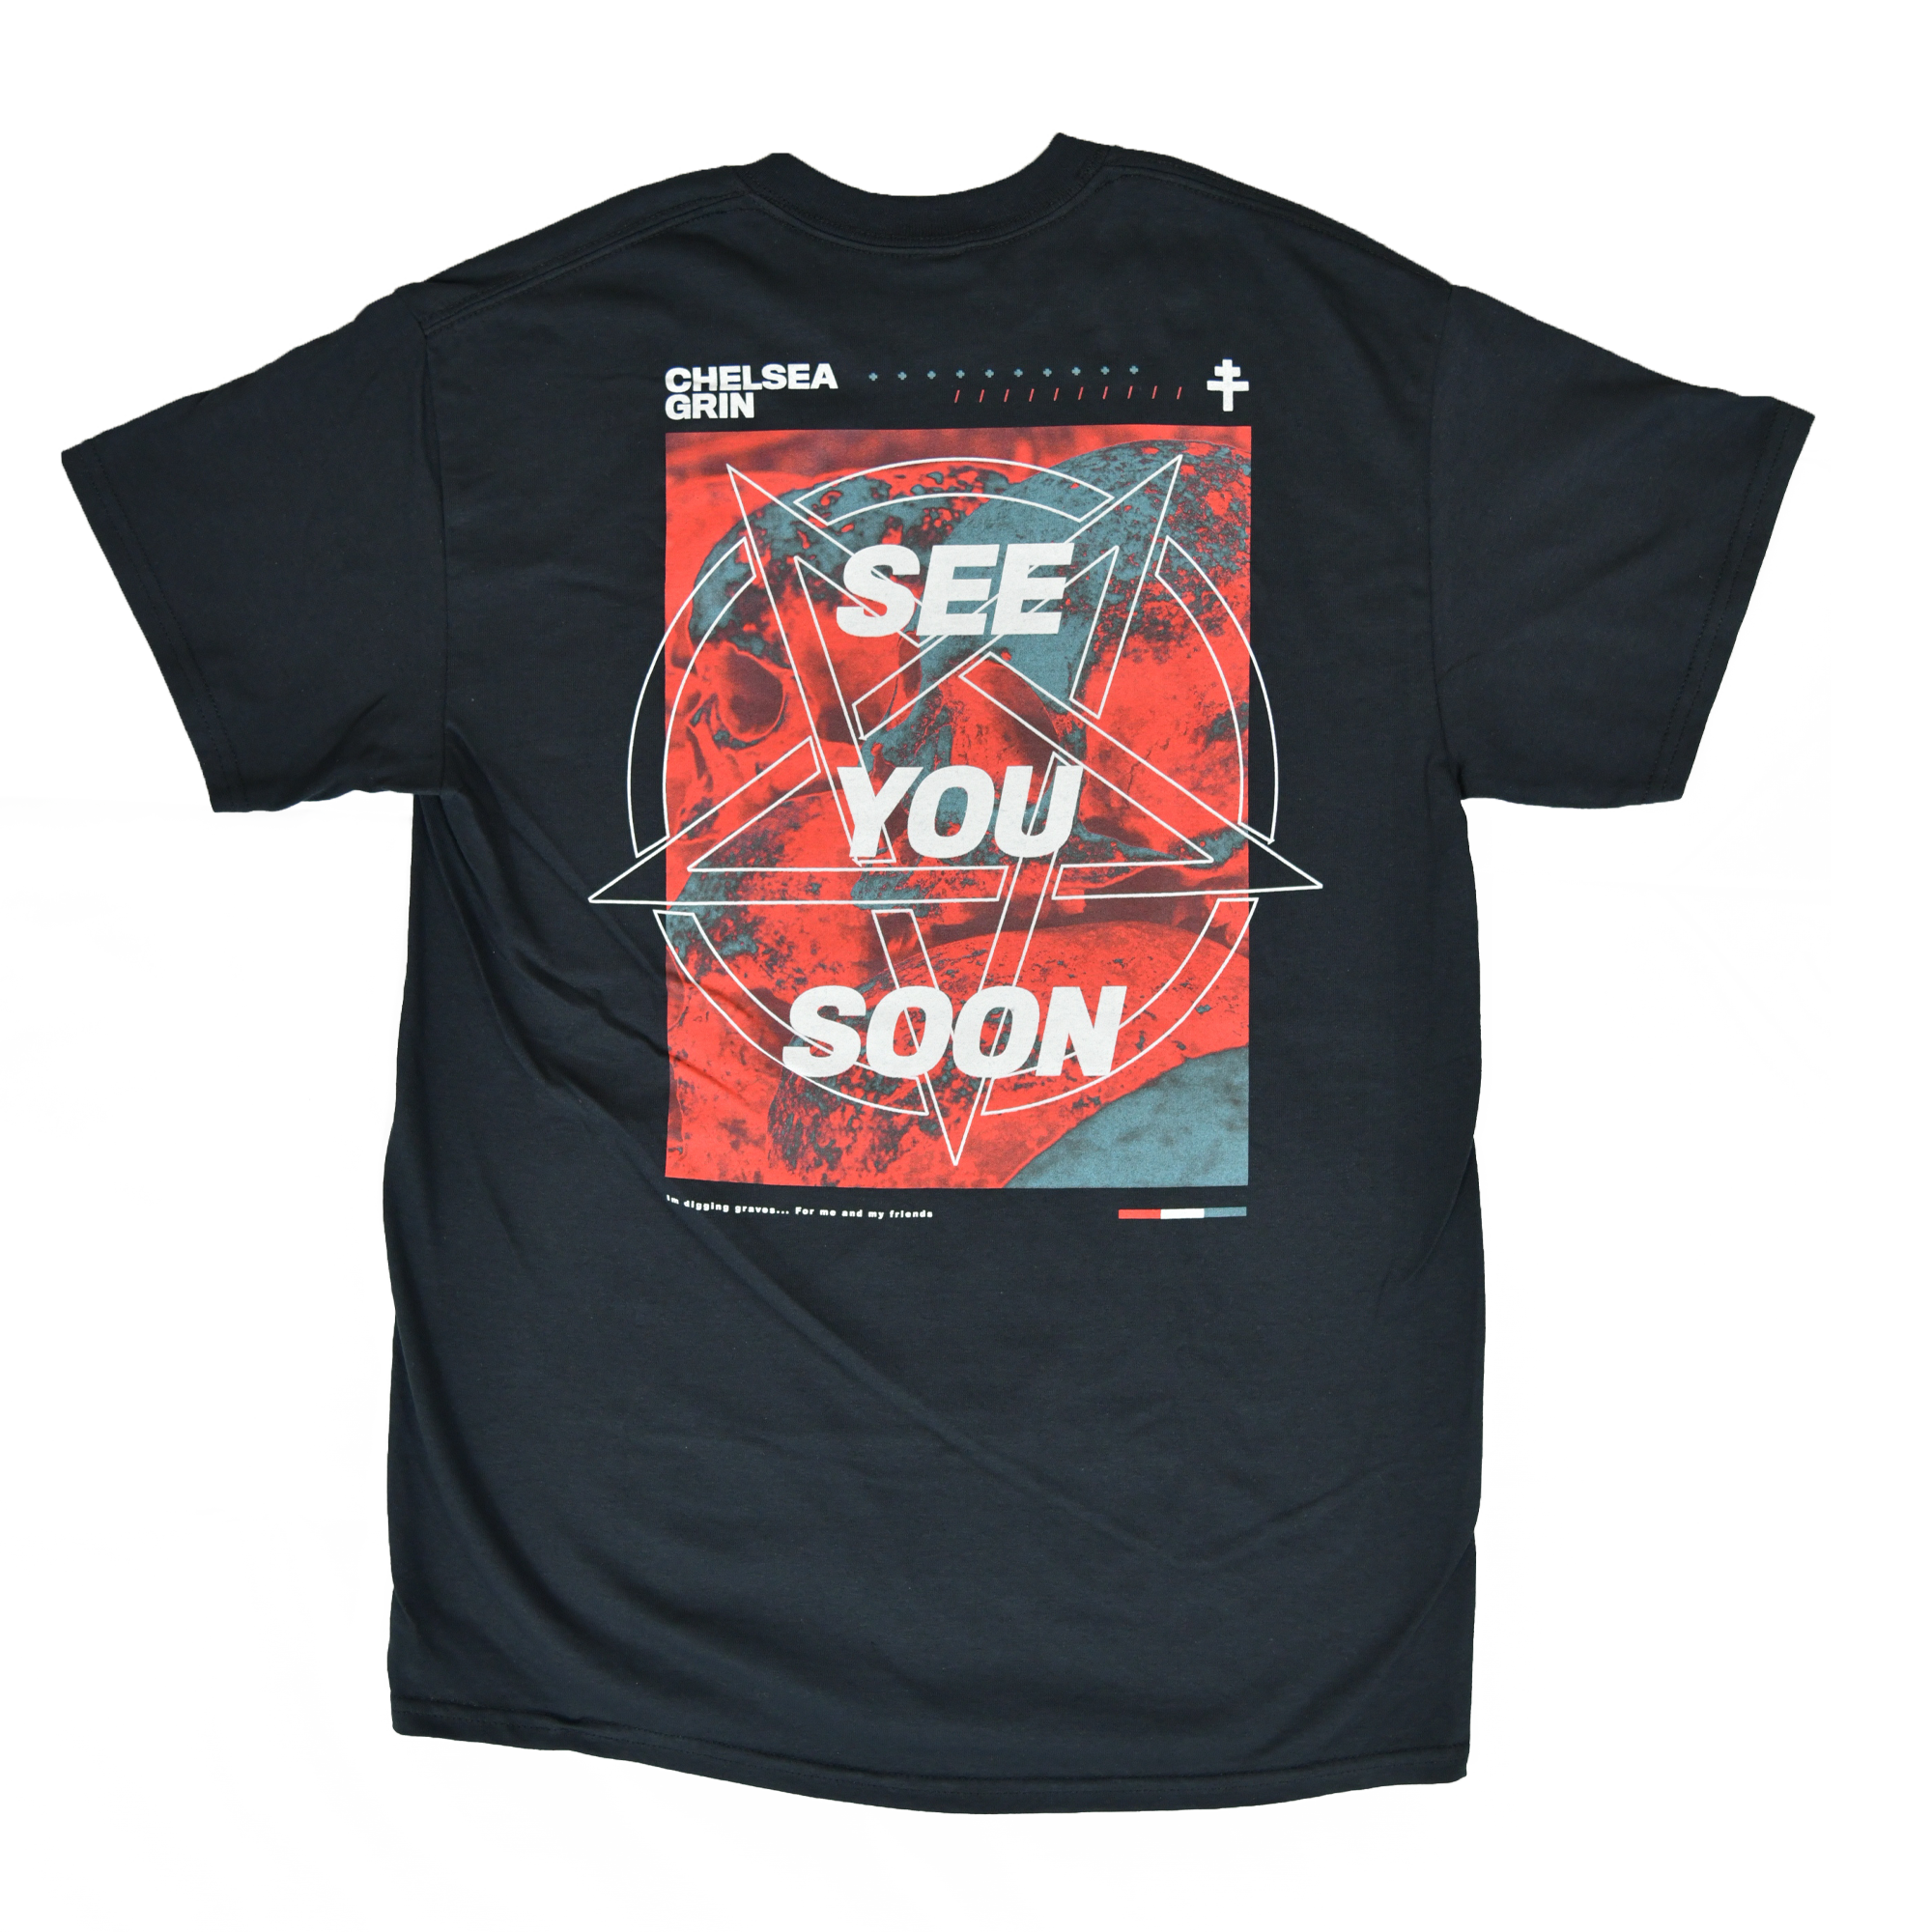 Chelsea Grin - See You Soon Shirt